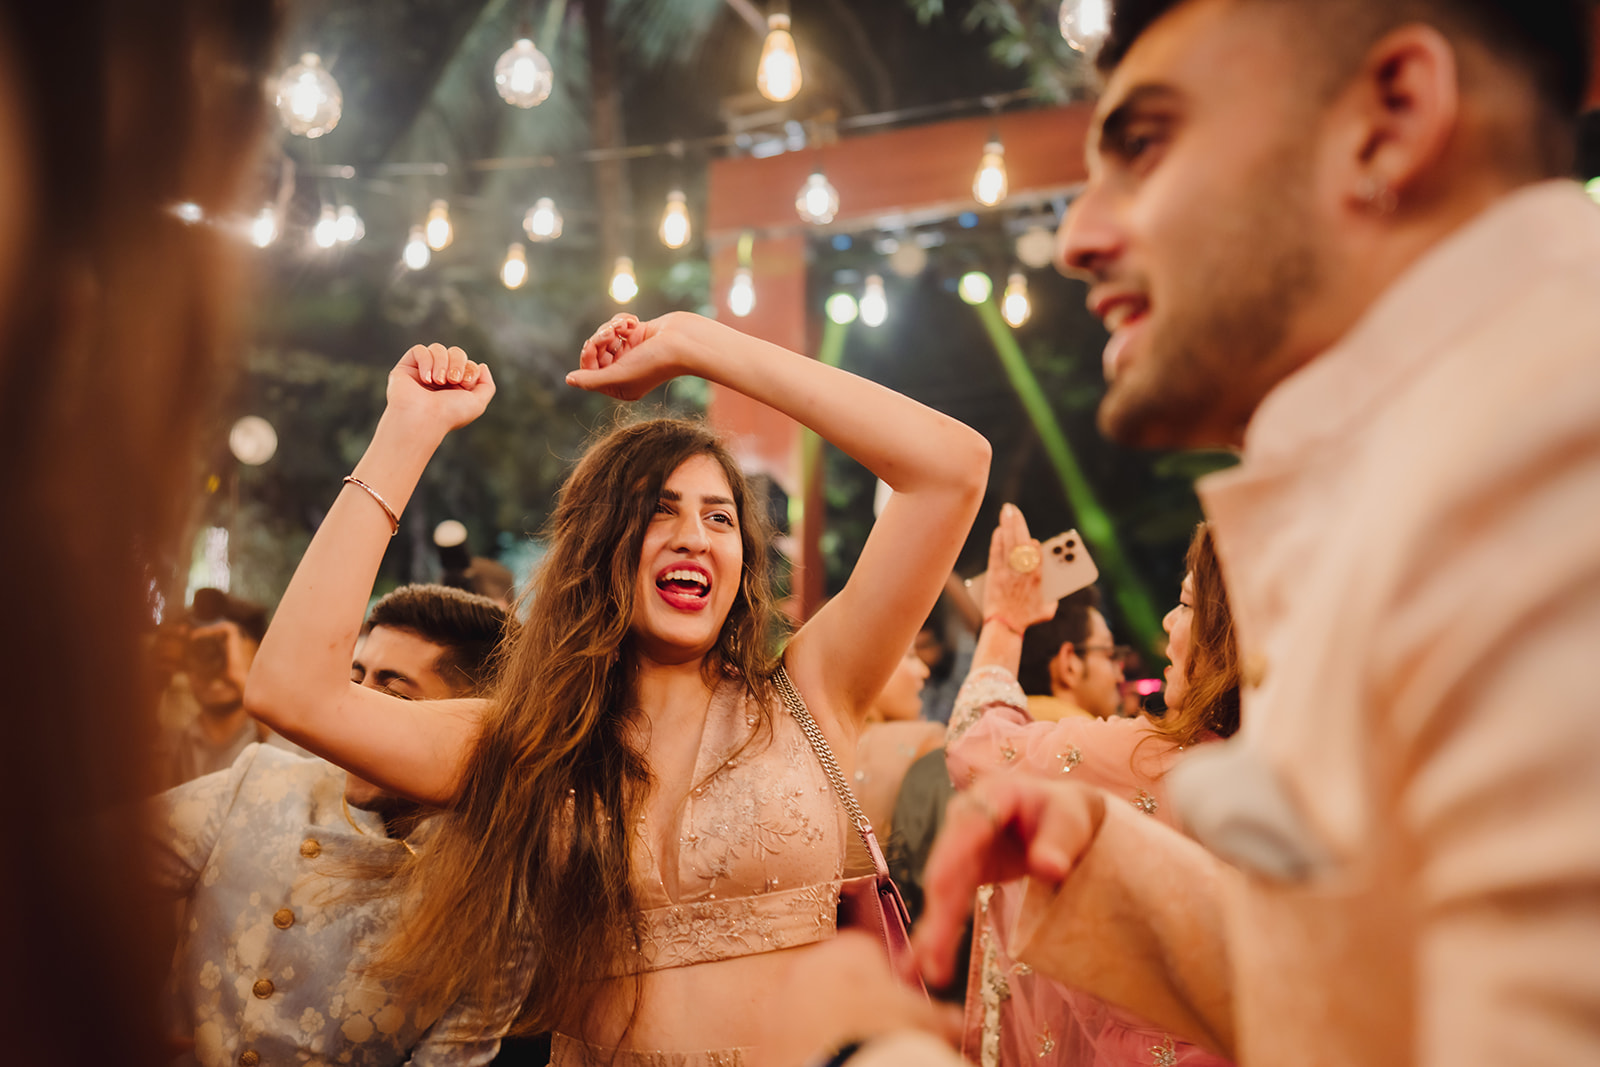 Dance floor revelry: Guest joyfully dancing the night away at the event